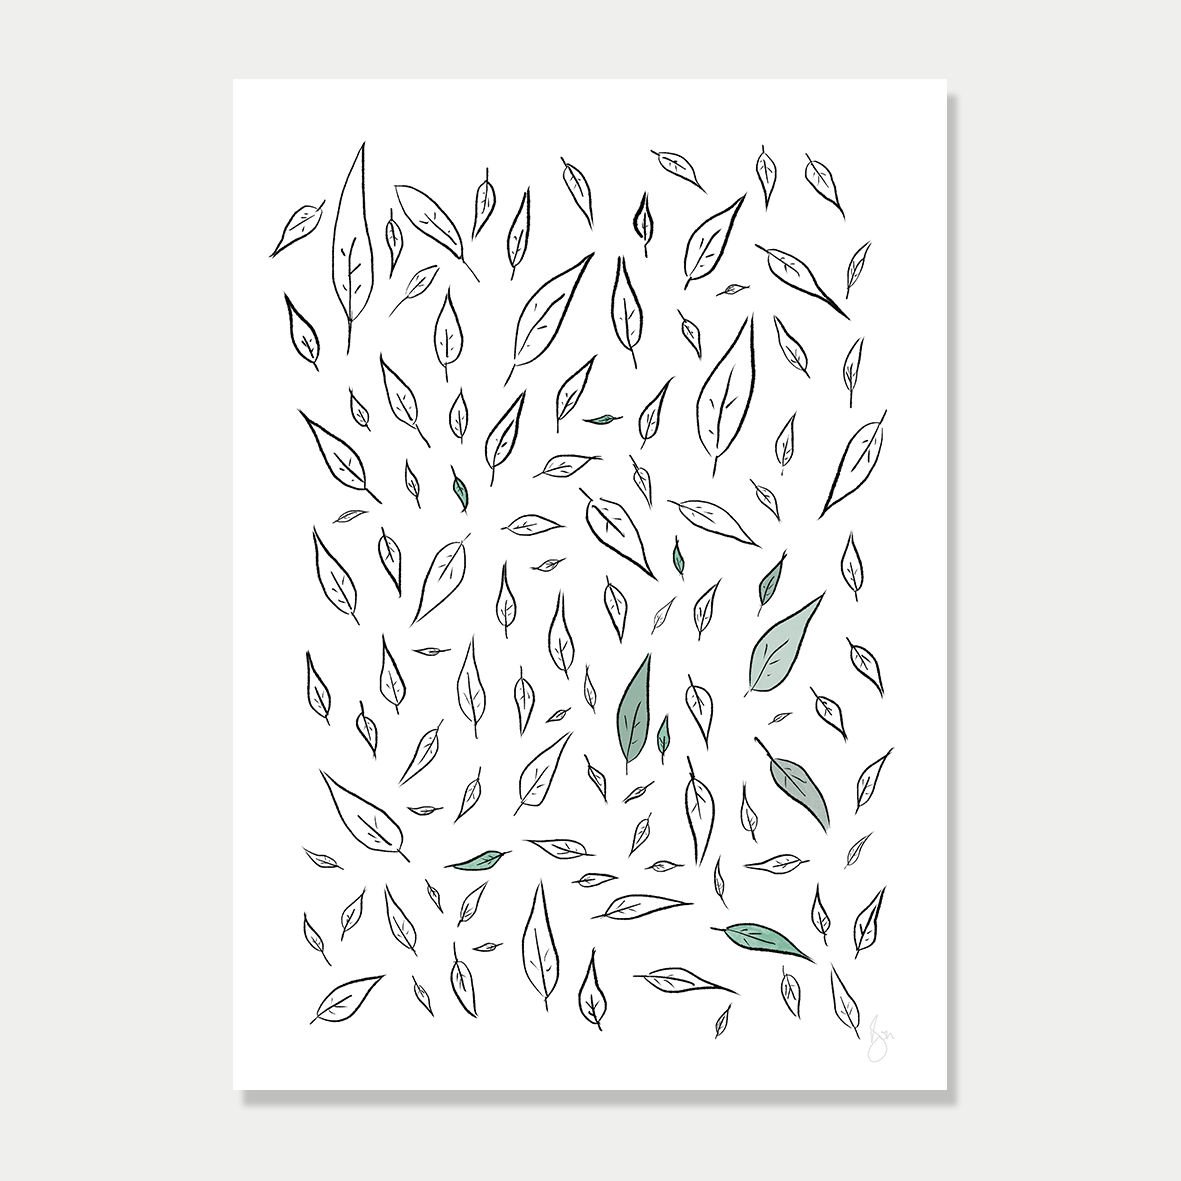 This art print is a playful minimal illustration of leaves, by Bon Jung. Printed in New Zealand by endemicworld.